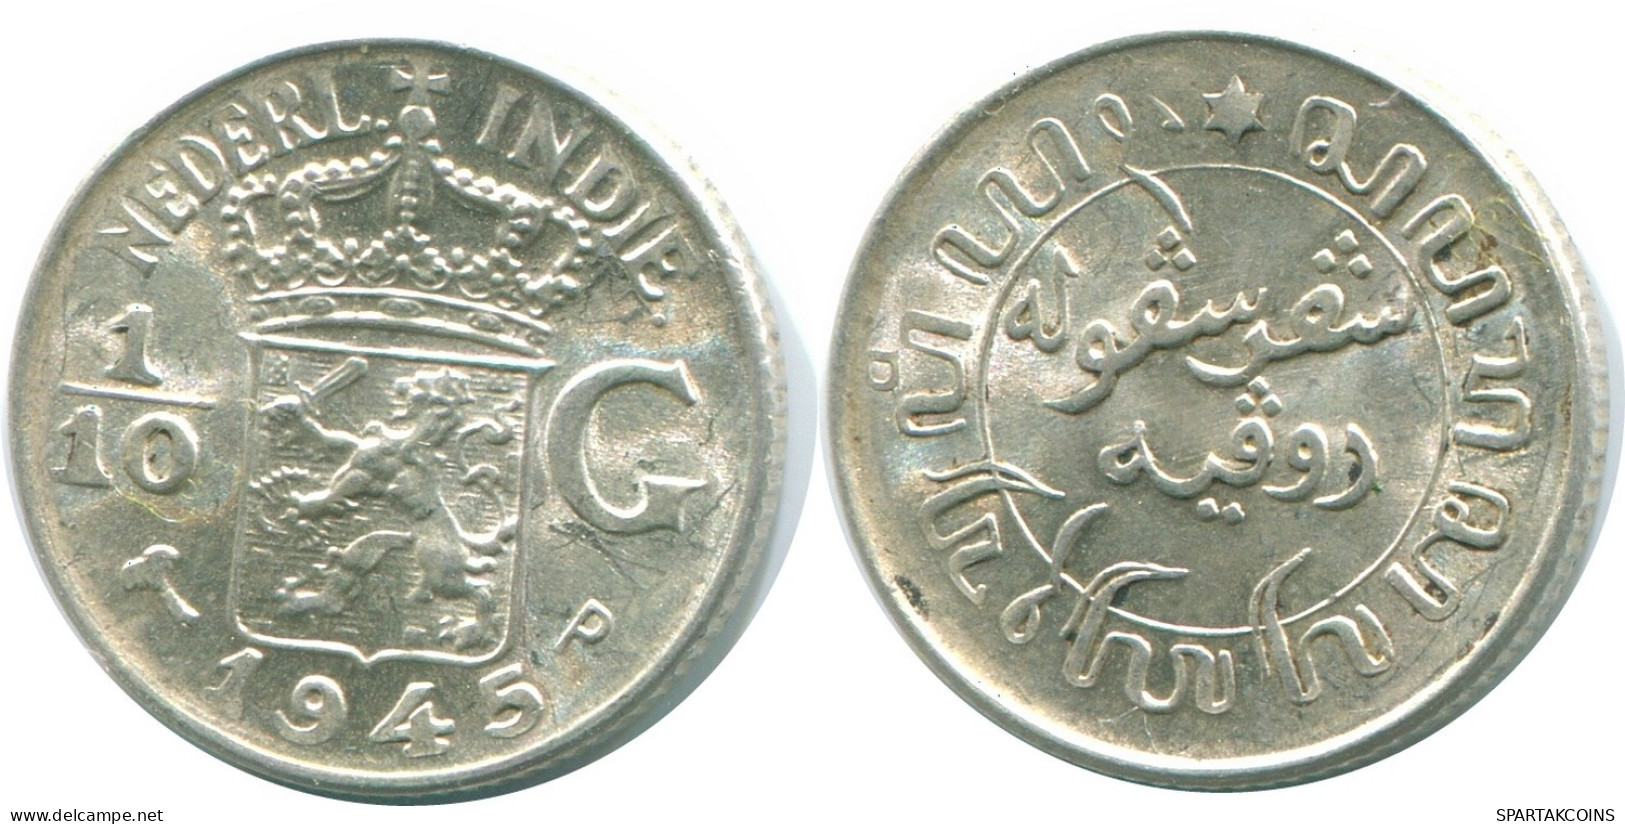 1/10 GULDEN 1945 P NETHERLANDS EAST INDIES SILVER Colonial Coin #NL13983.3.U.A - Indes Neerlandesas